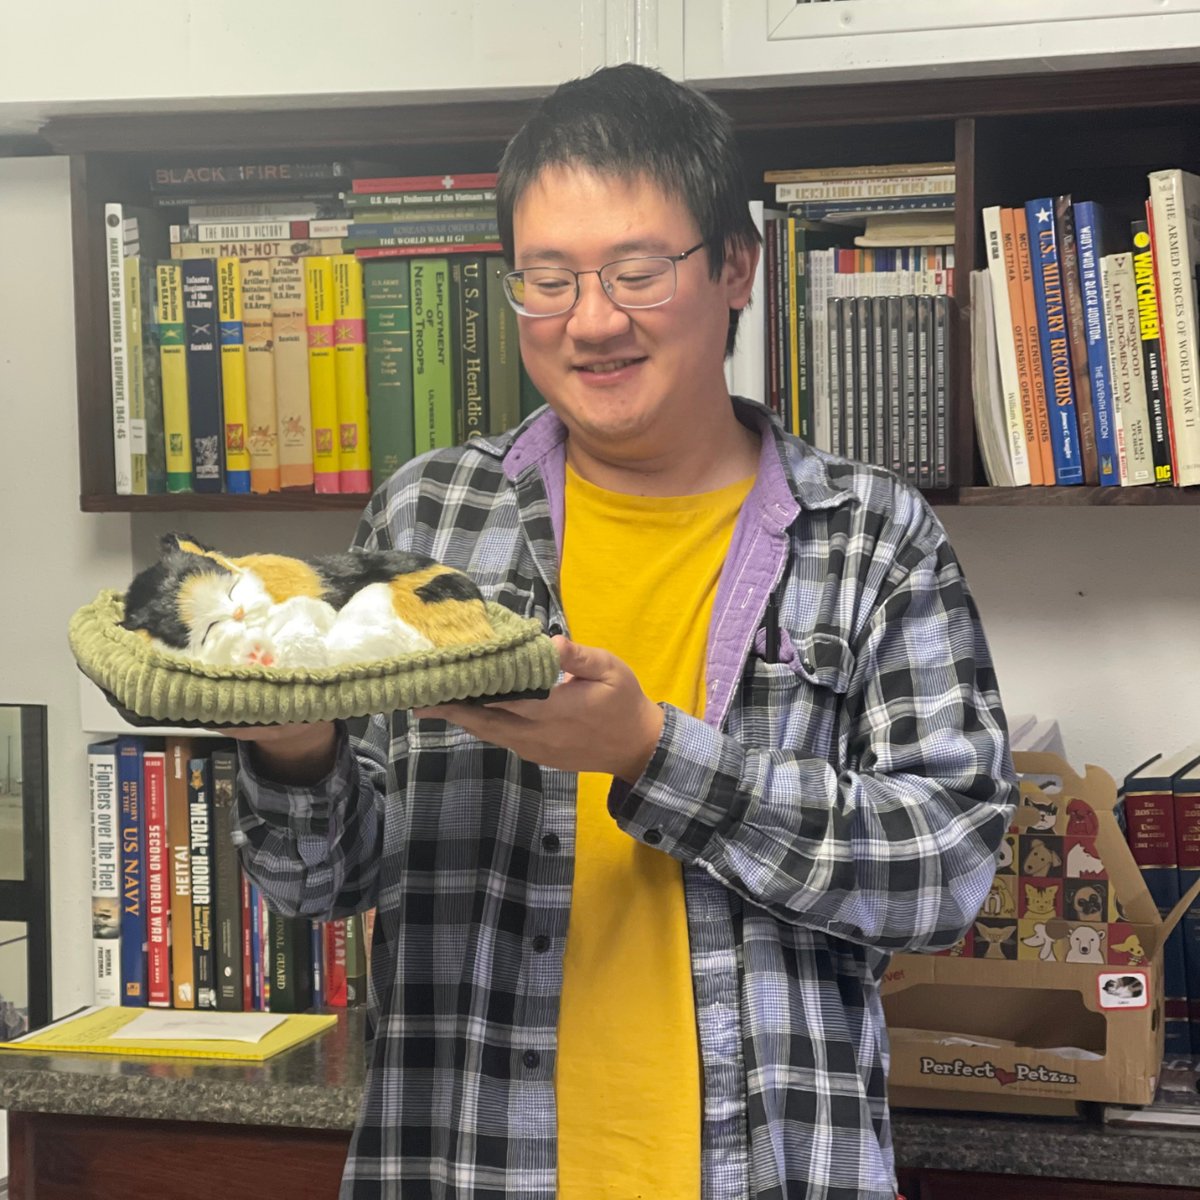 Congrats to Archivist Jason Fung who was the winner of the Most Creative Presentation for our staff year-end project. As a part of his prize, he received a “museum cat,” a calico he named Bob Marley.  Stay tuned for Bob Marley’s adventures around the museum. #houston